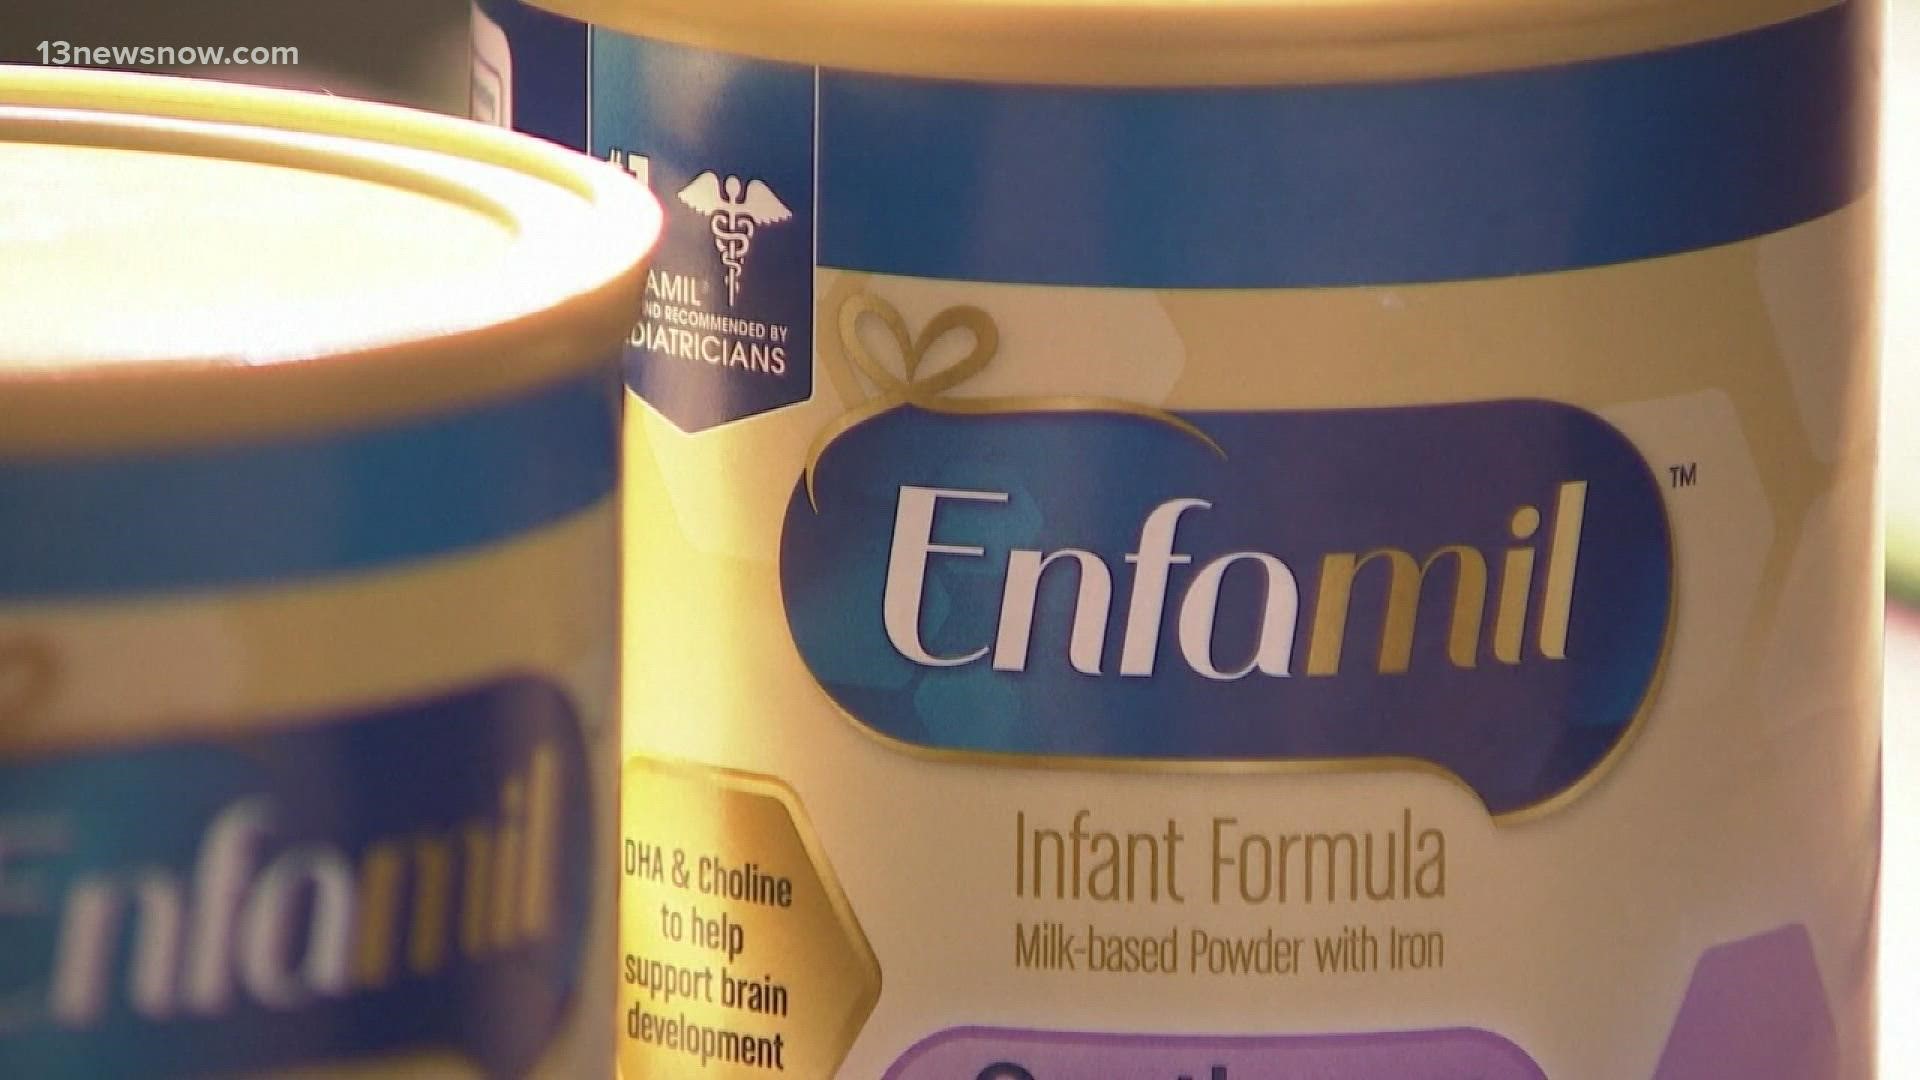 Parents across the U.S. are scrambling to find baby formula because supply disruptions and a massive safety recall have swept many leading brands off store shelves.